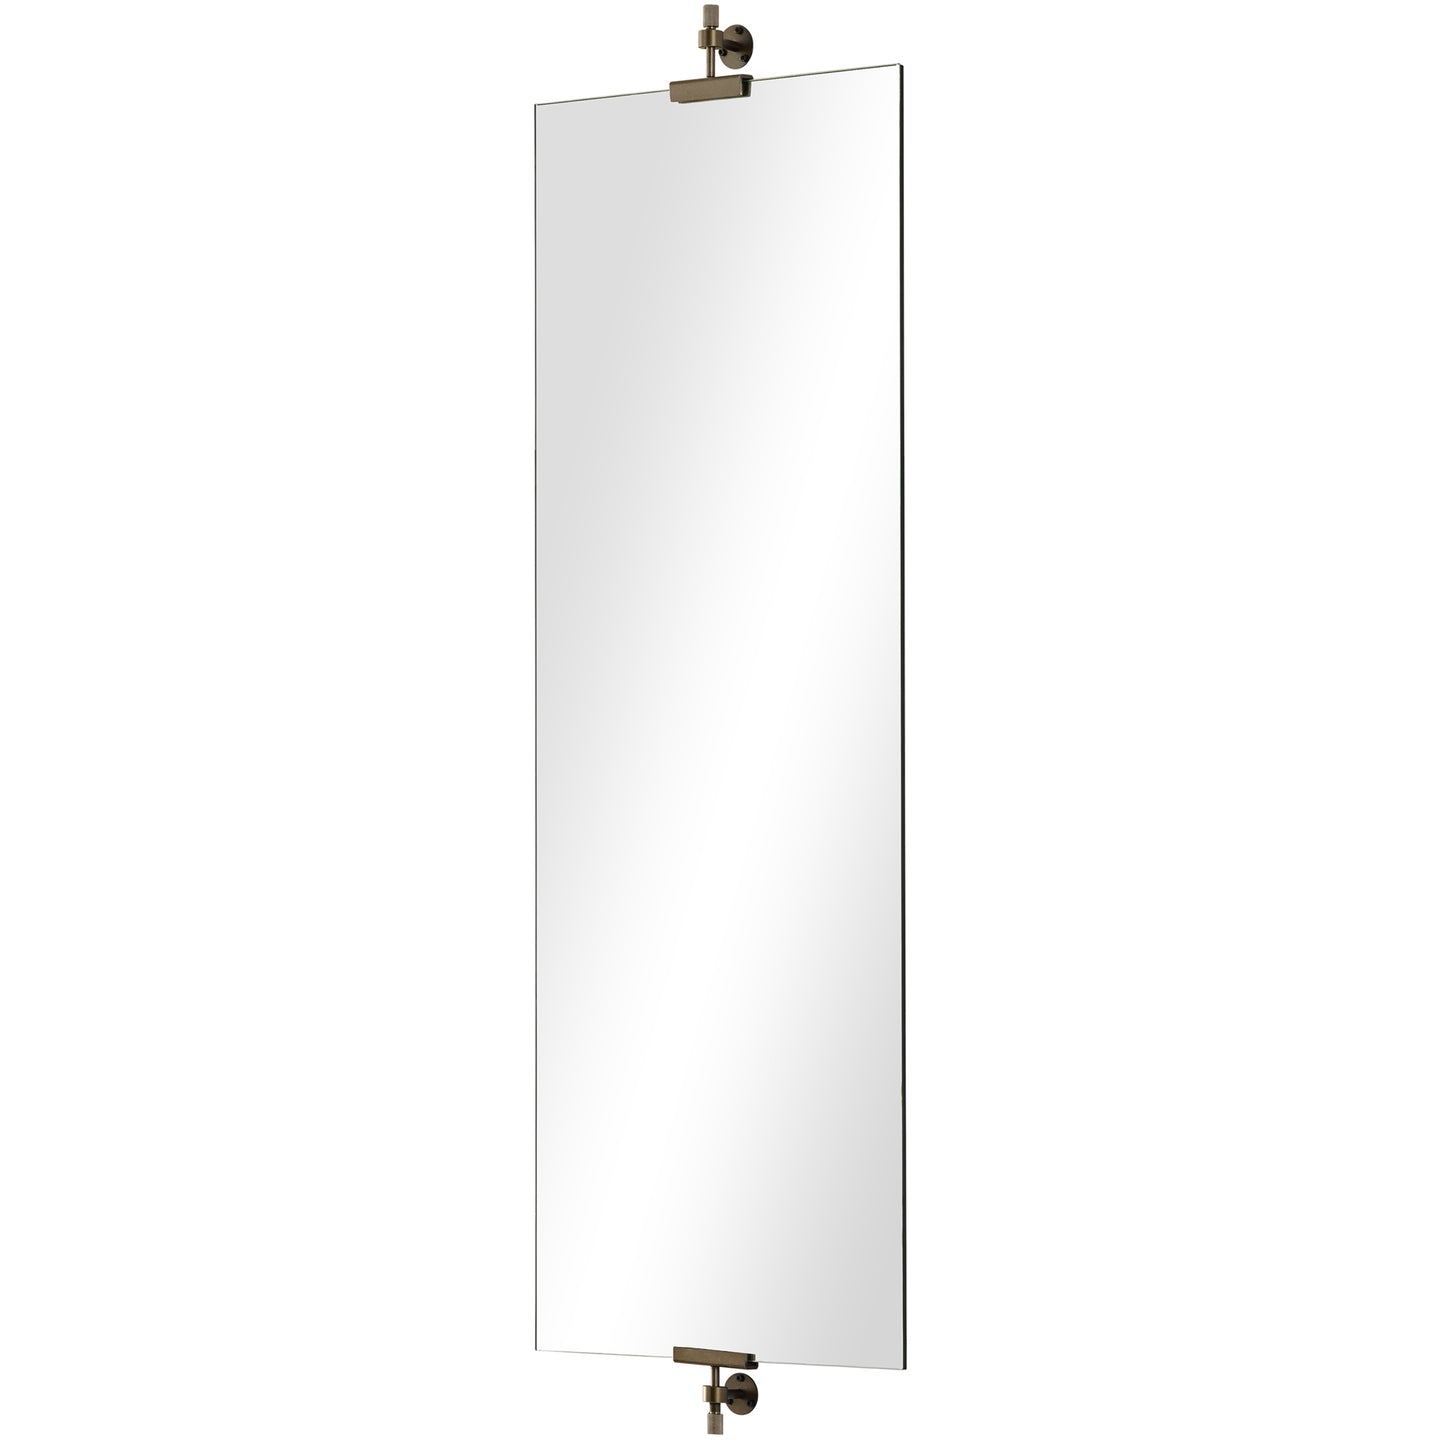 Ashlar Full Length Wall Mirror - All Glass - Polished Edges - Antique Bronze Clips